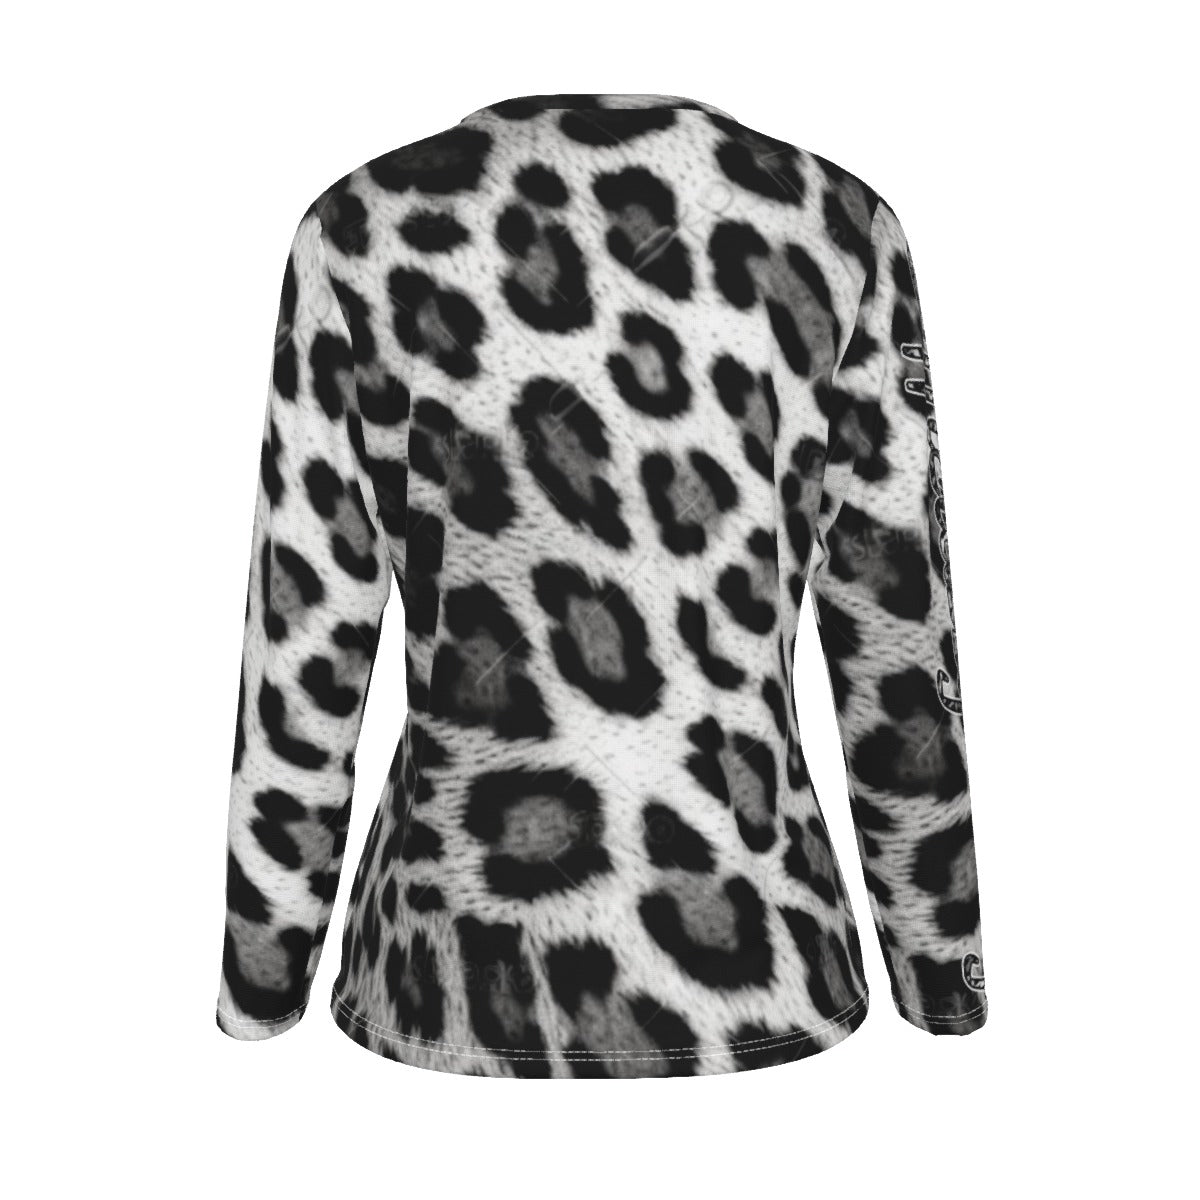 Officially Sexy Snow Leopard Print Collection Women's Oversized 190GSM Cotton AOP Leopard Print T-shirt (English) 3